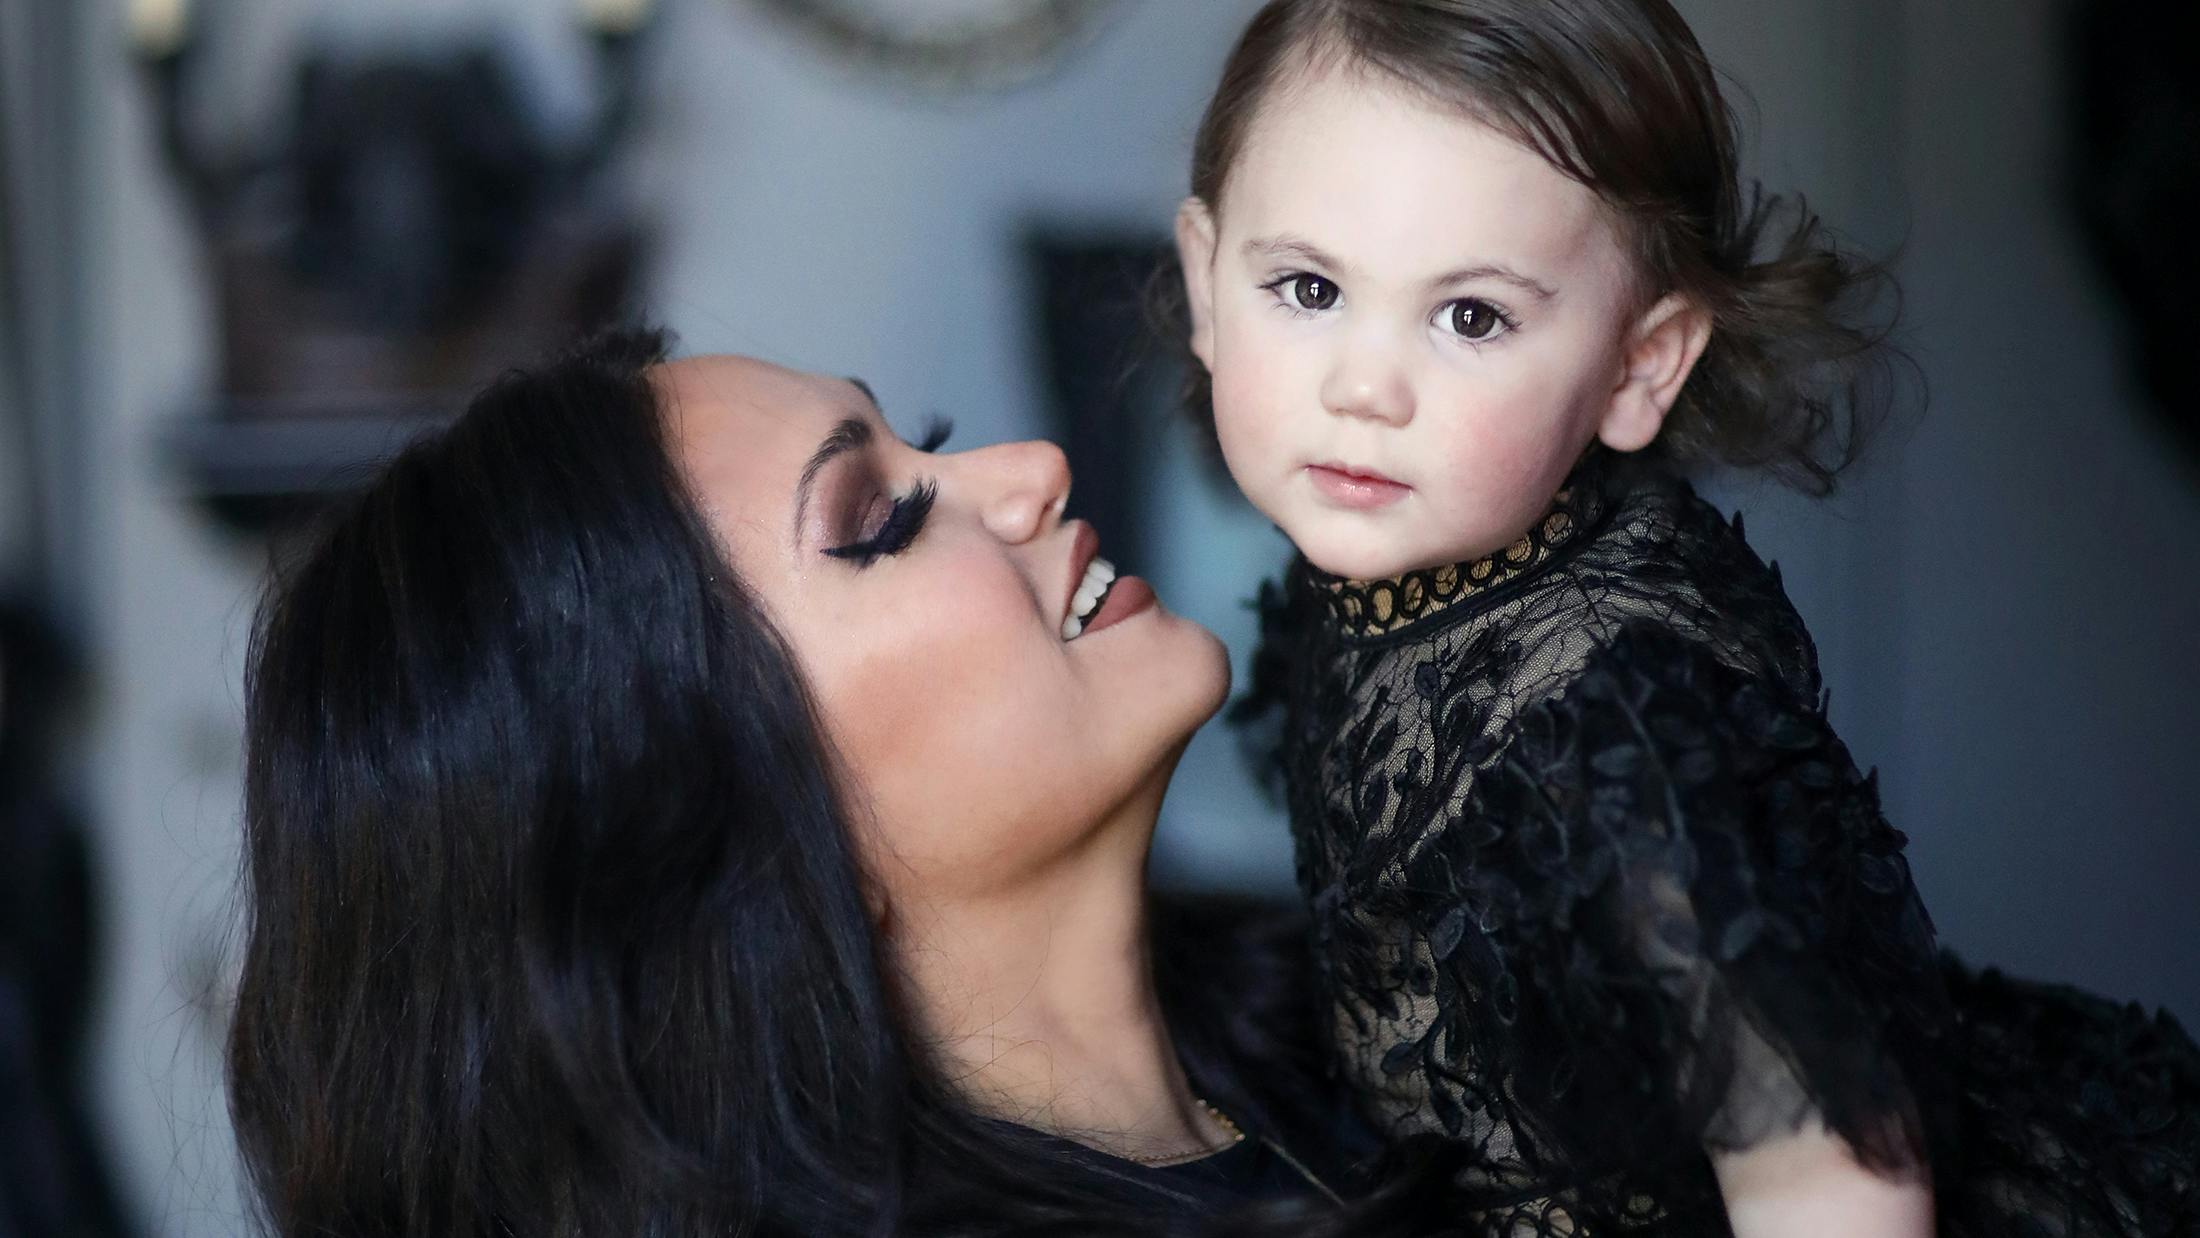 The Kids Are Alright: Meet the gothic mums defying parental expectations